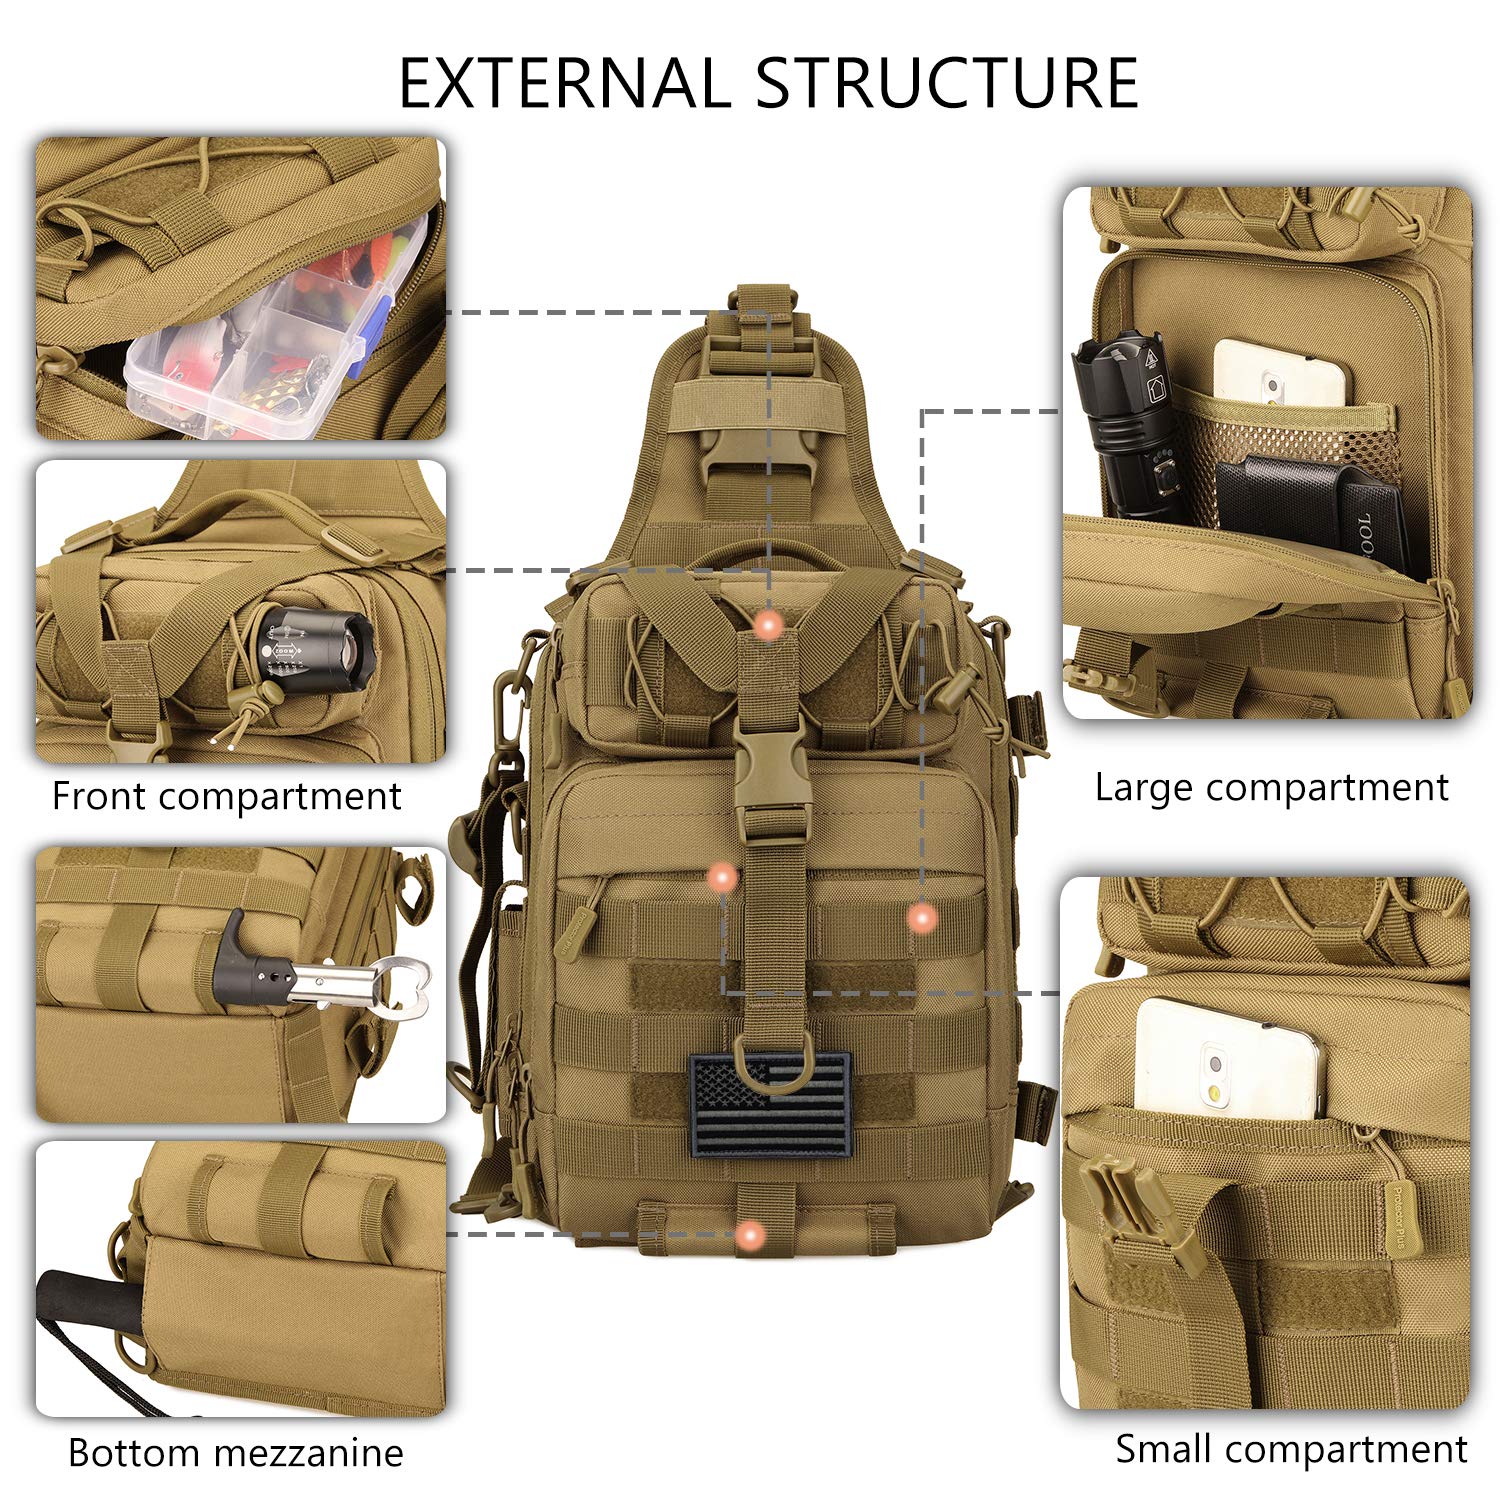 Tactical Sling Military MOLLE Crossbody Pack Brust-Schulter-Rucksack #B031